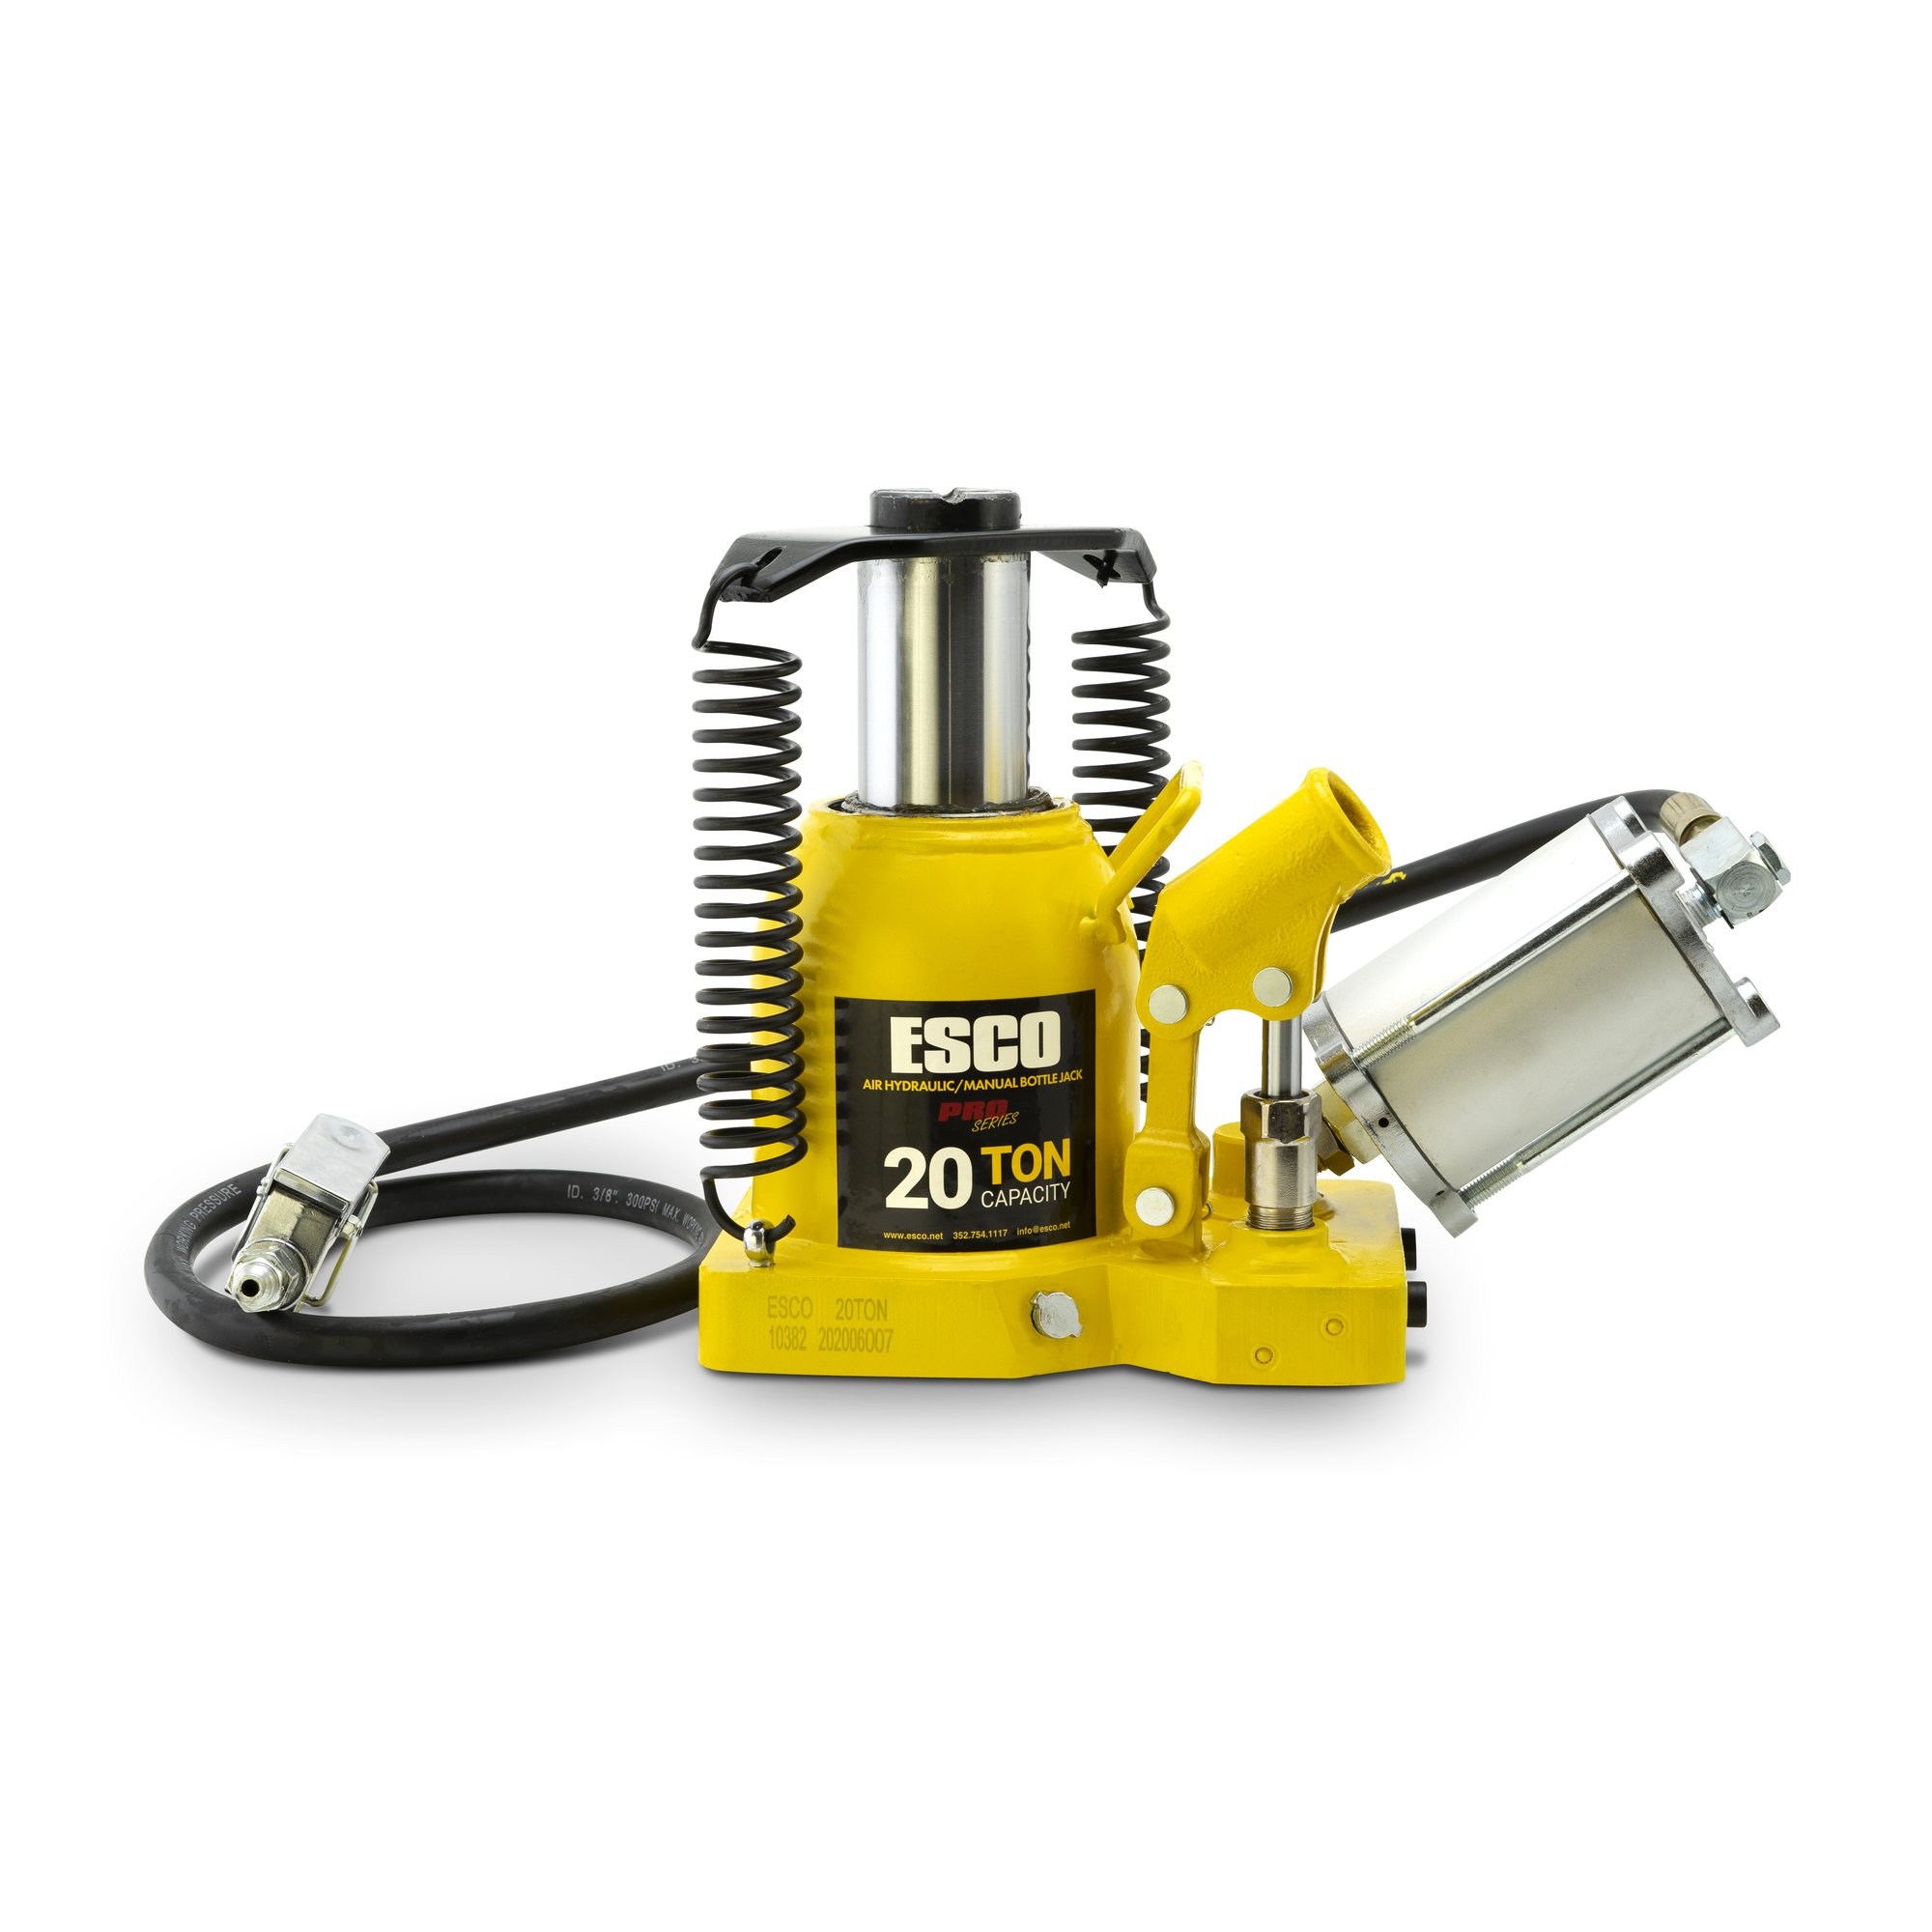 ESCO, 20 Ton Pro Low Hgt Series Air/Hydr Bottle Jack, Lift Capacity 20 Tons,  Max. Lift Height 12.625 in, Min. Lift Height 7.125 in, Model# 10382  Northern Tool